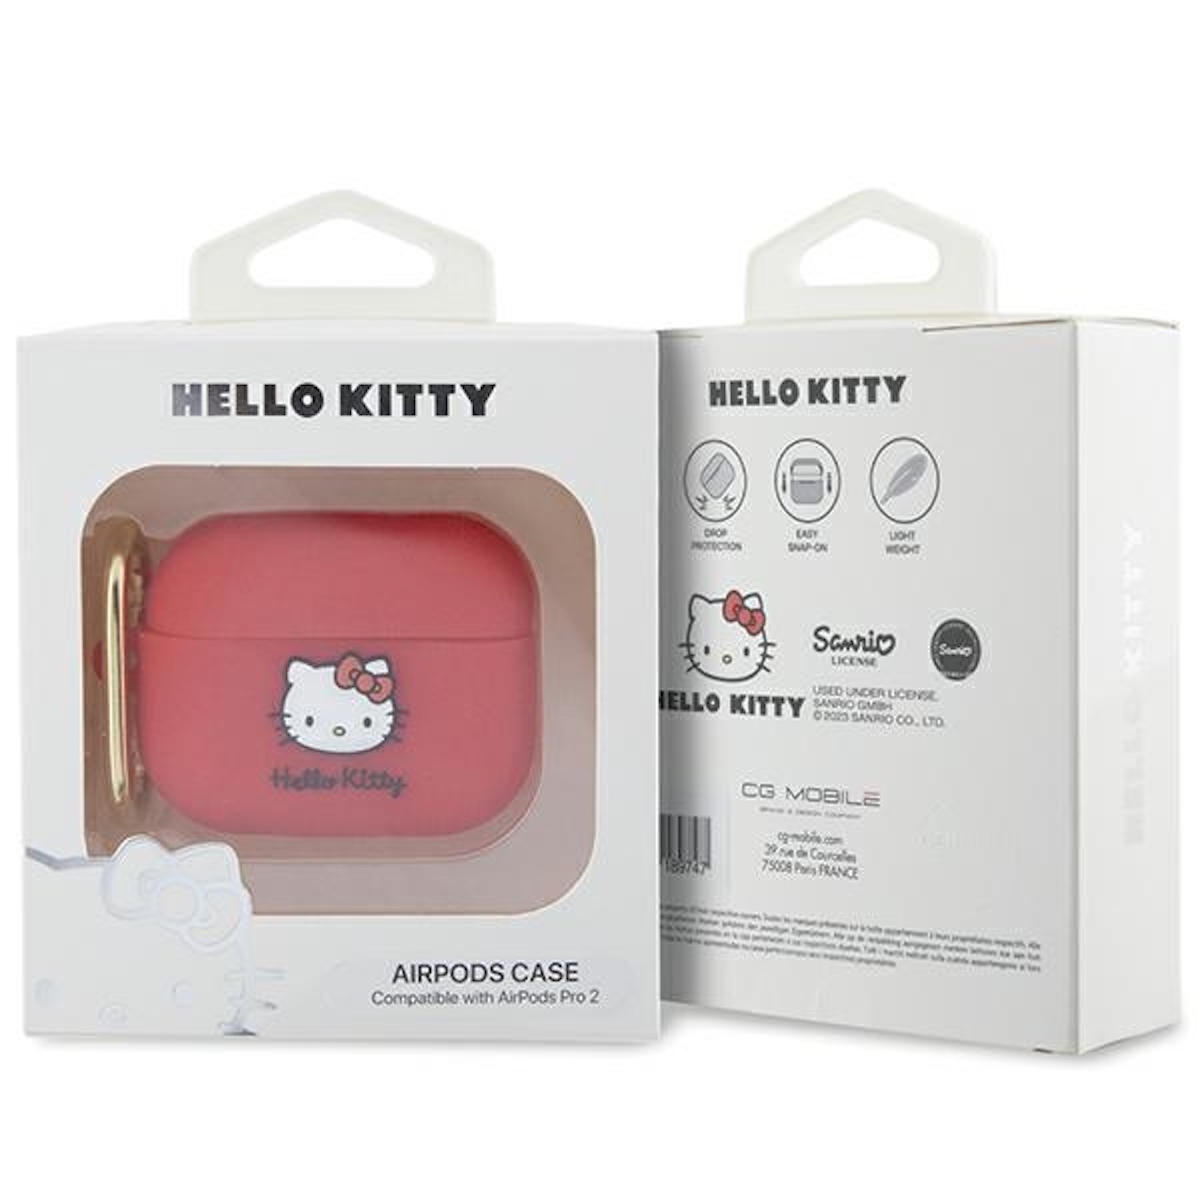 Hülle 3D Silikon BY Rot AirPods Apple, Kitty CHEFMADE Pro 2. Tasche HELLO AirPods Full Schutzhülle, KITTY Cover, Generation, Head